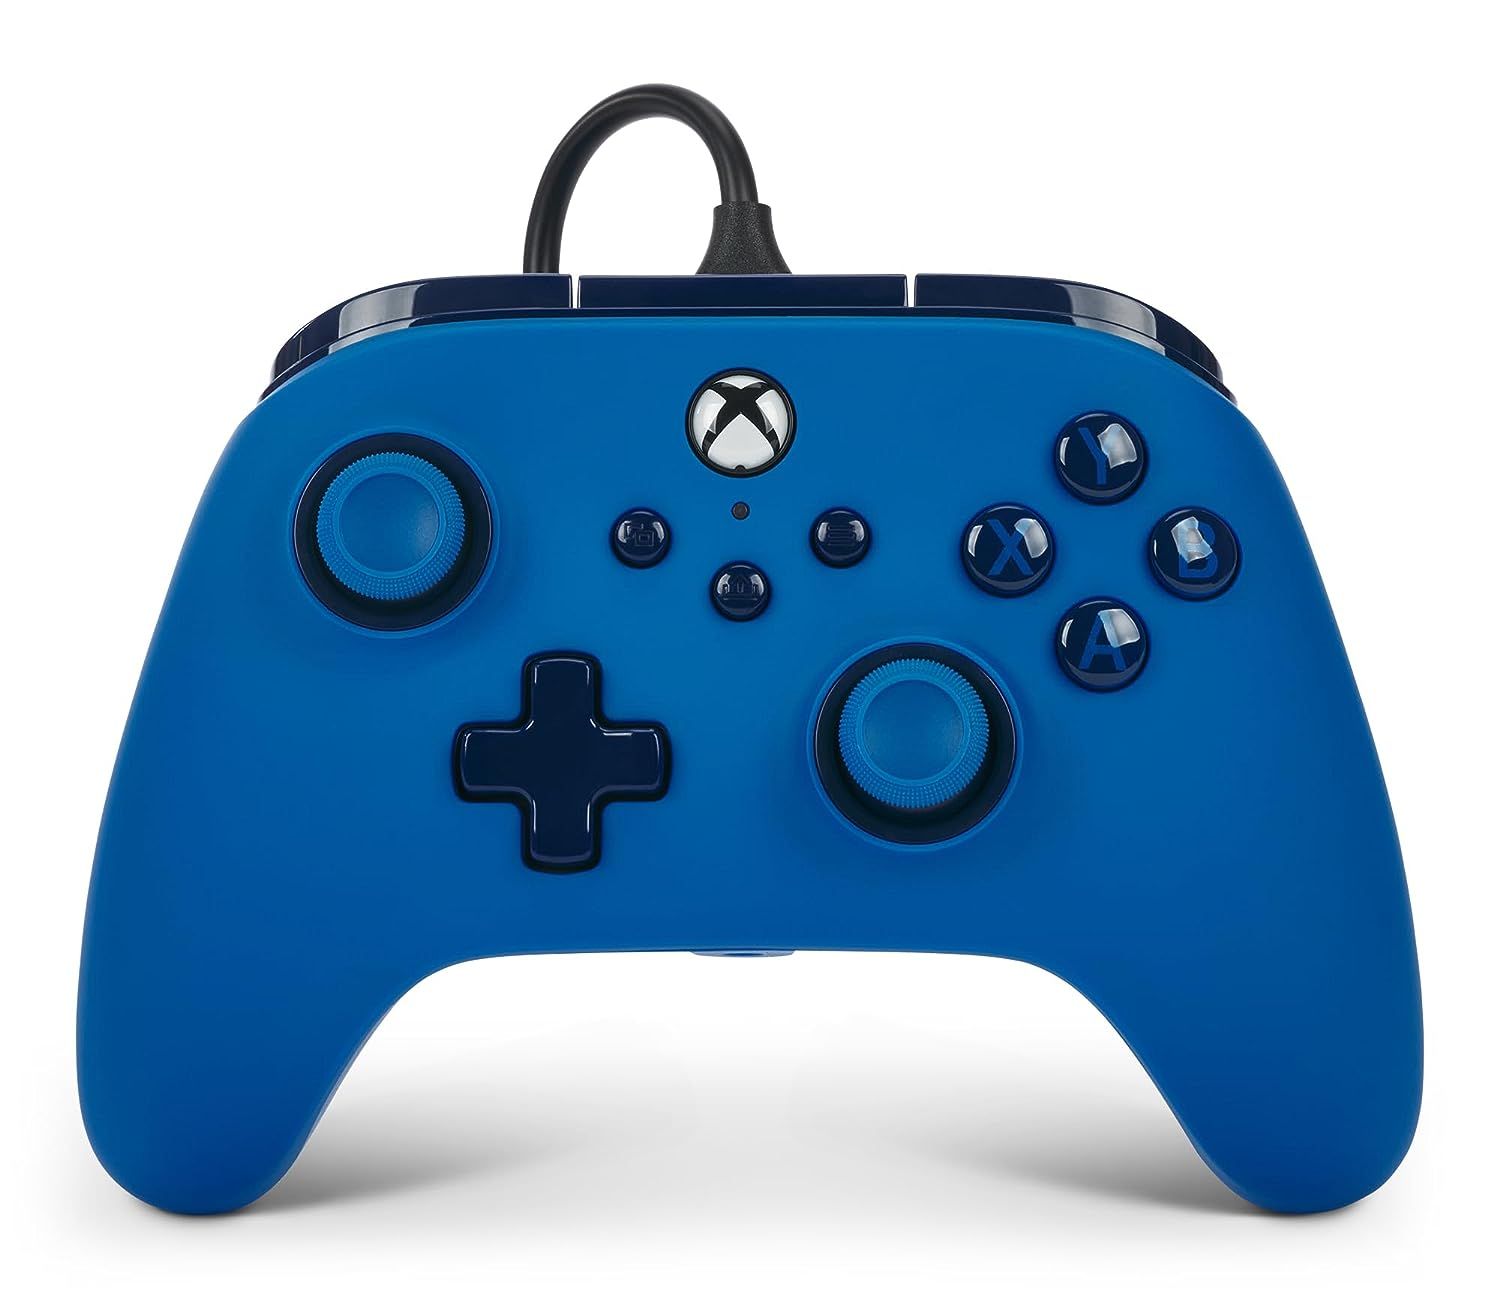 A Rare Deal Has the Advantage Game Controller for Xbox at a Discount